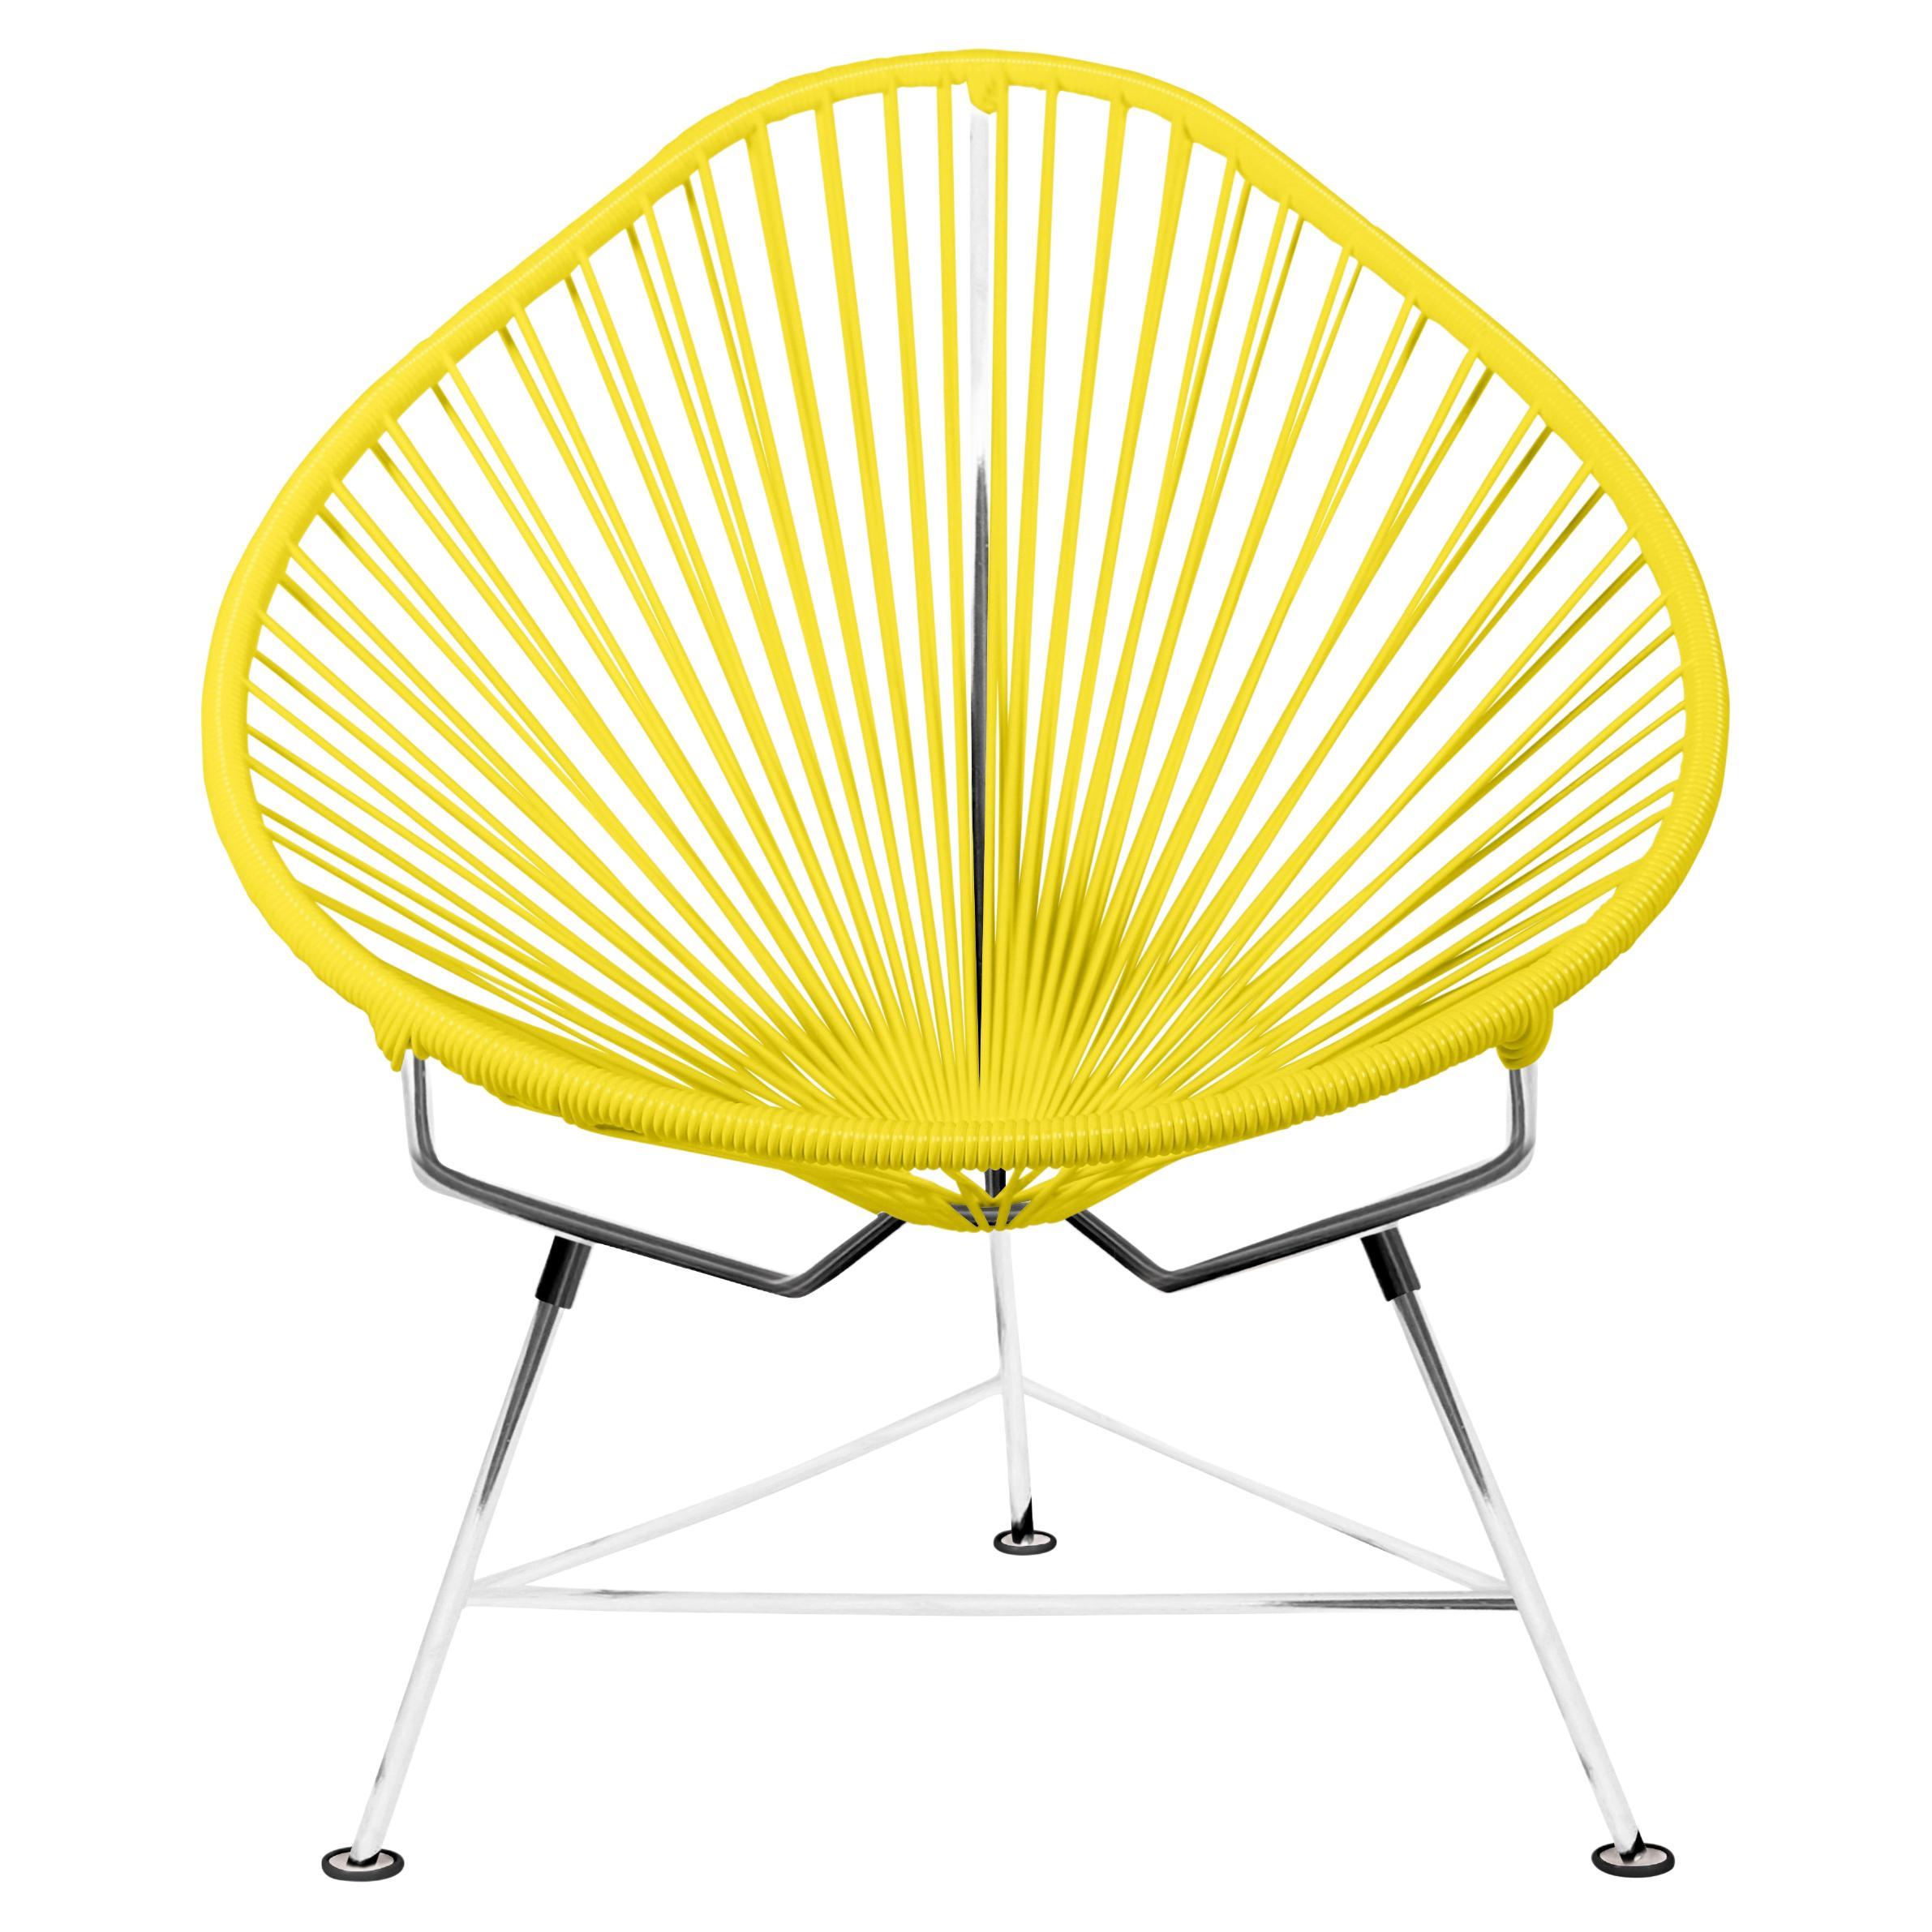 Innit Designs Acapulco Chair Yellow Weave on Chrome Frame For Sale